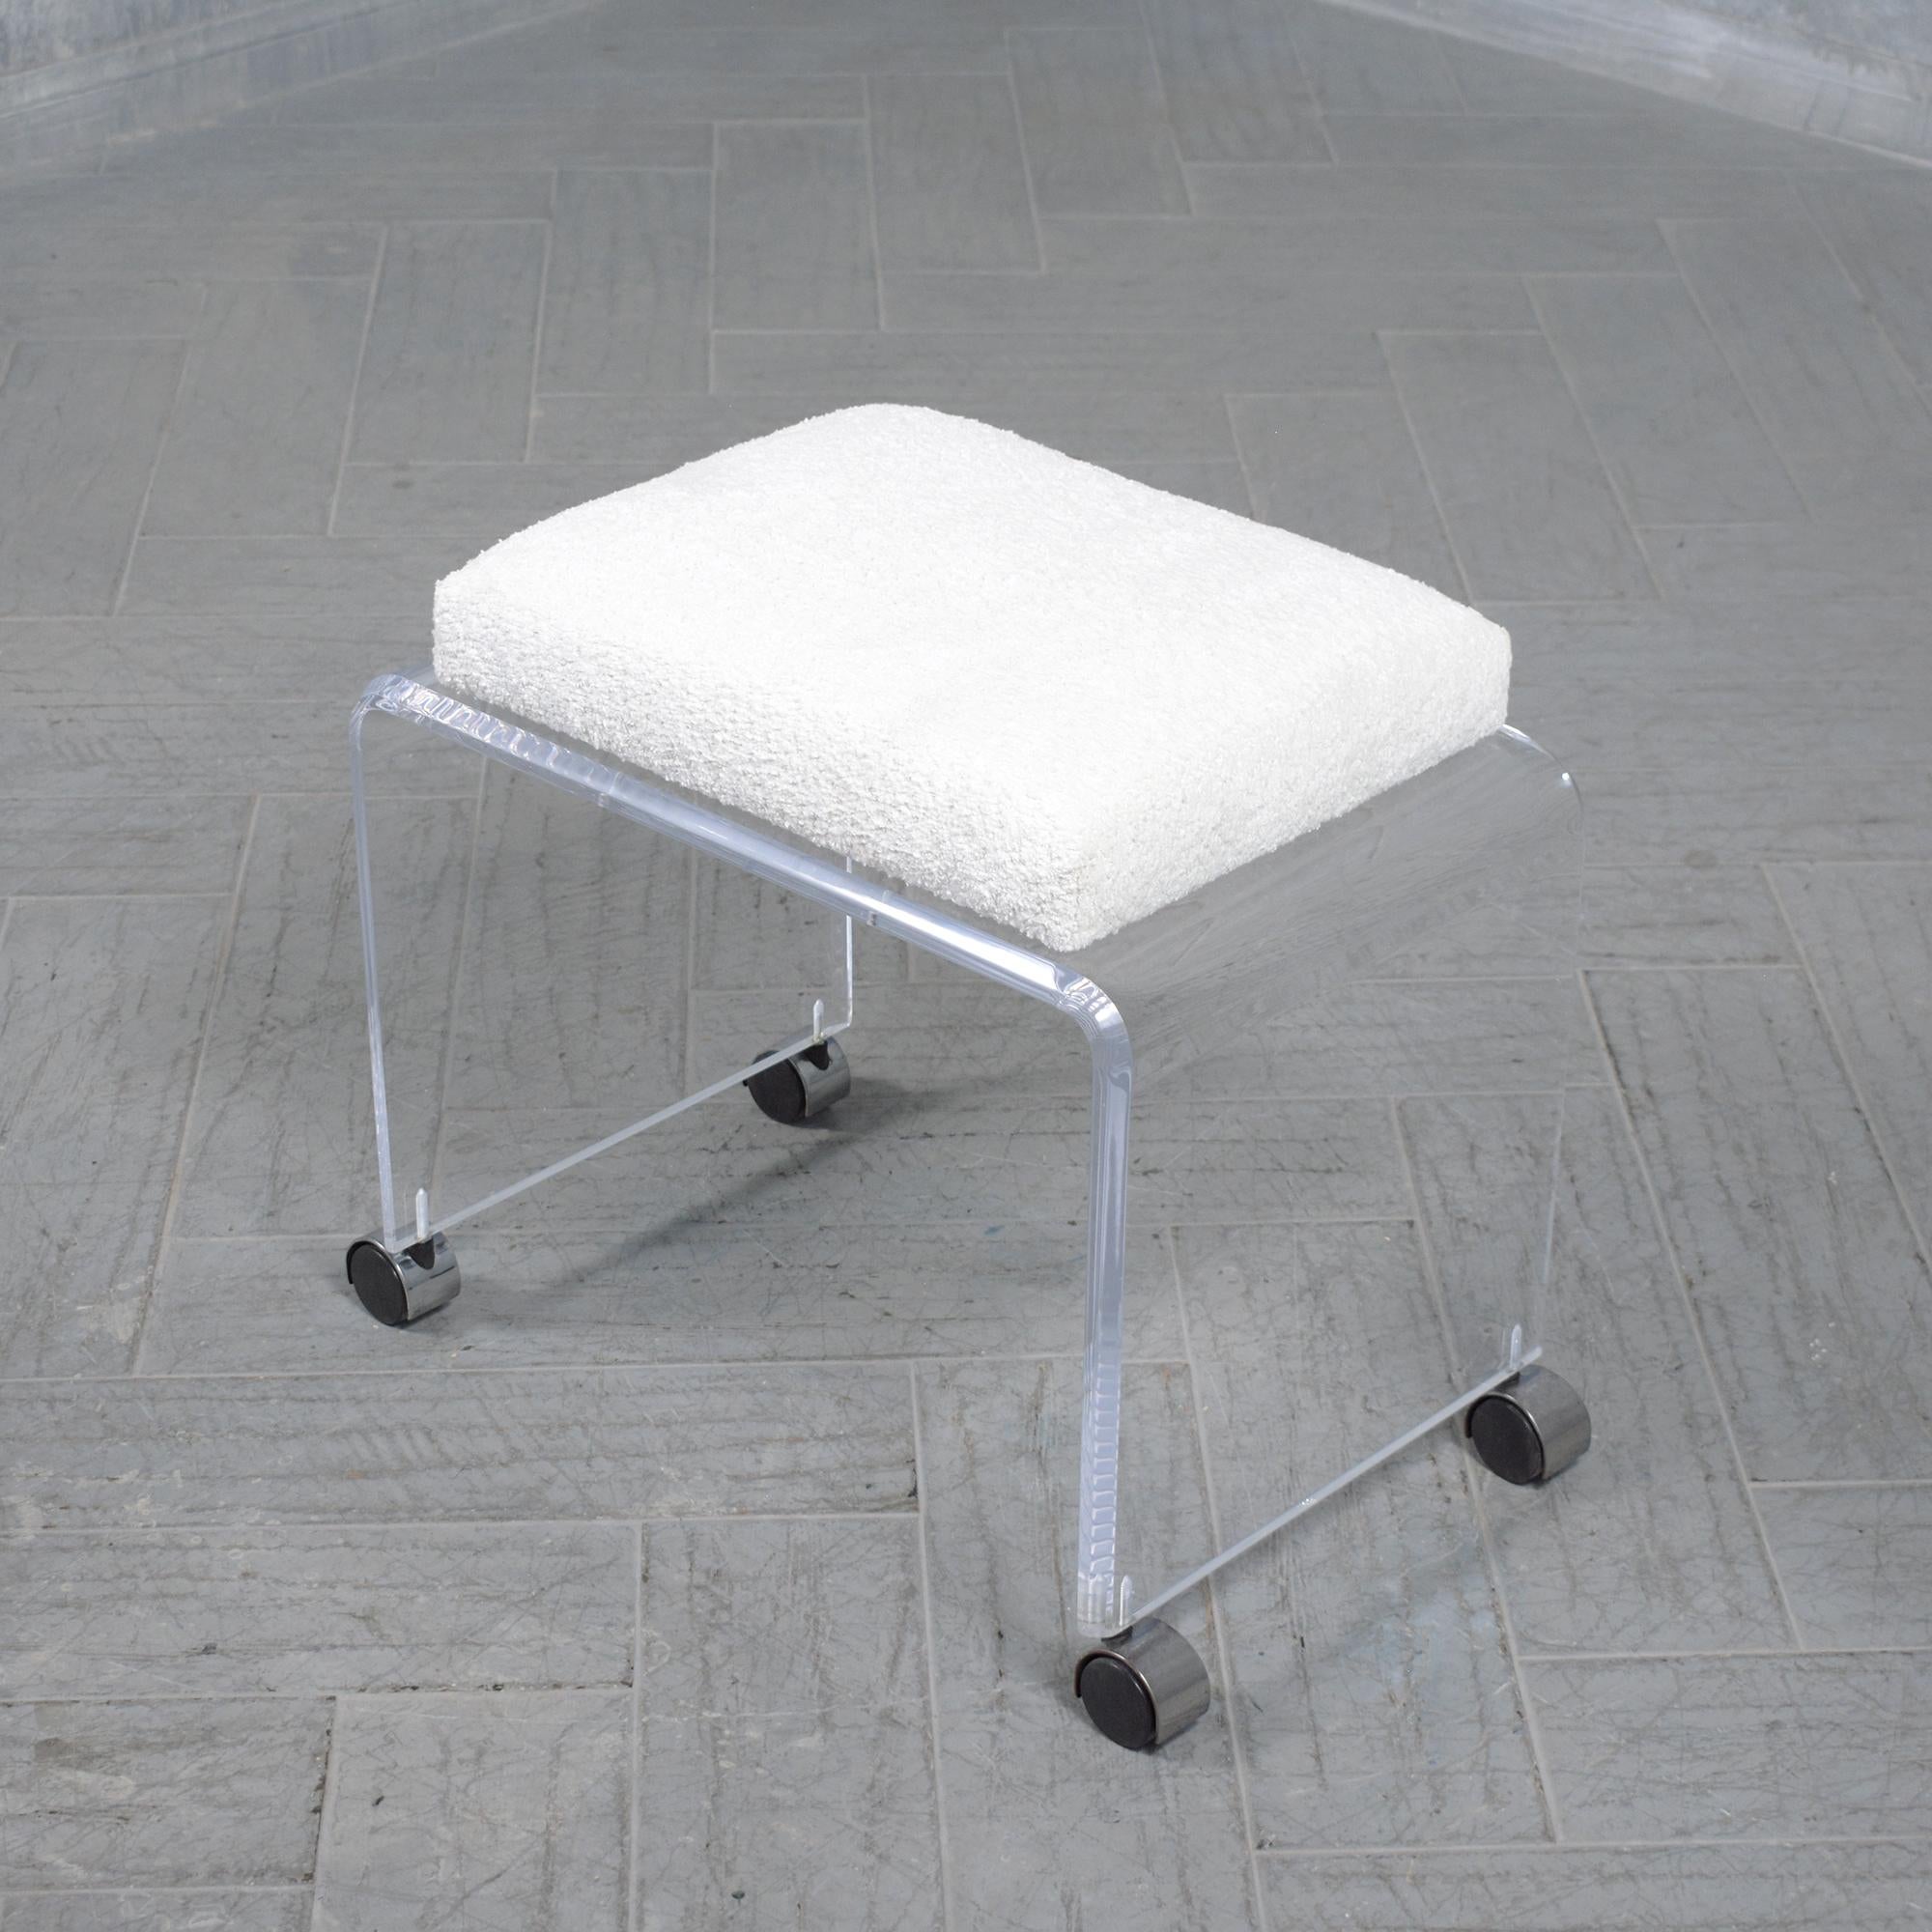 American Lucite Waterfall Bench: A Fusion of Mid-Century Elegance & Modern Style For Sale